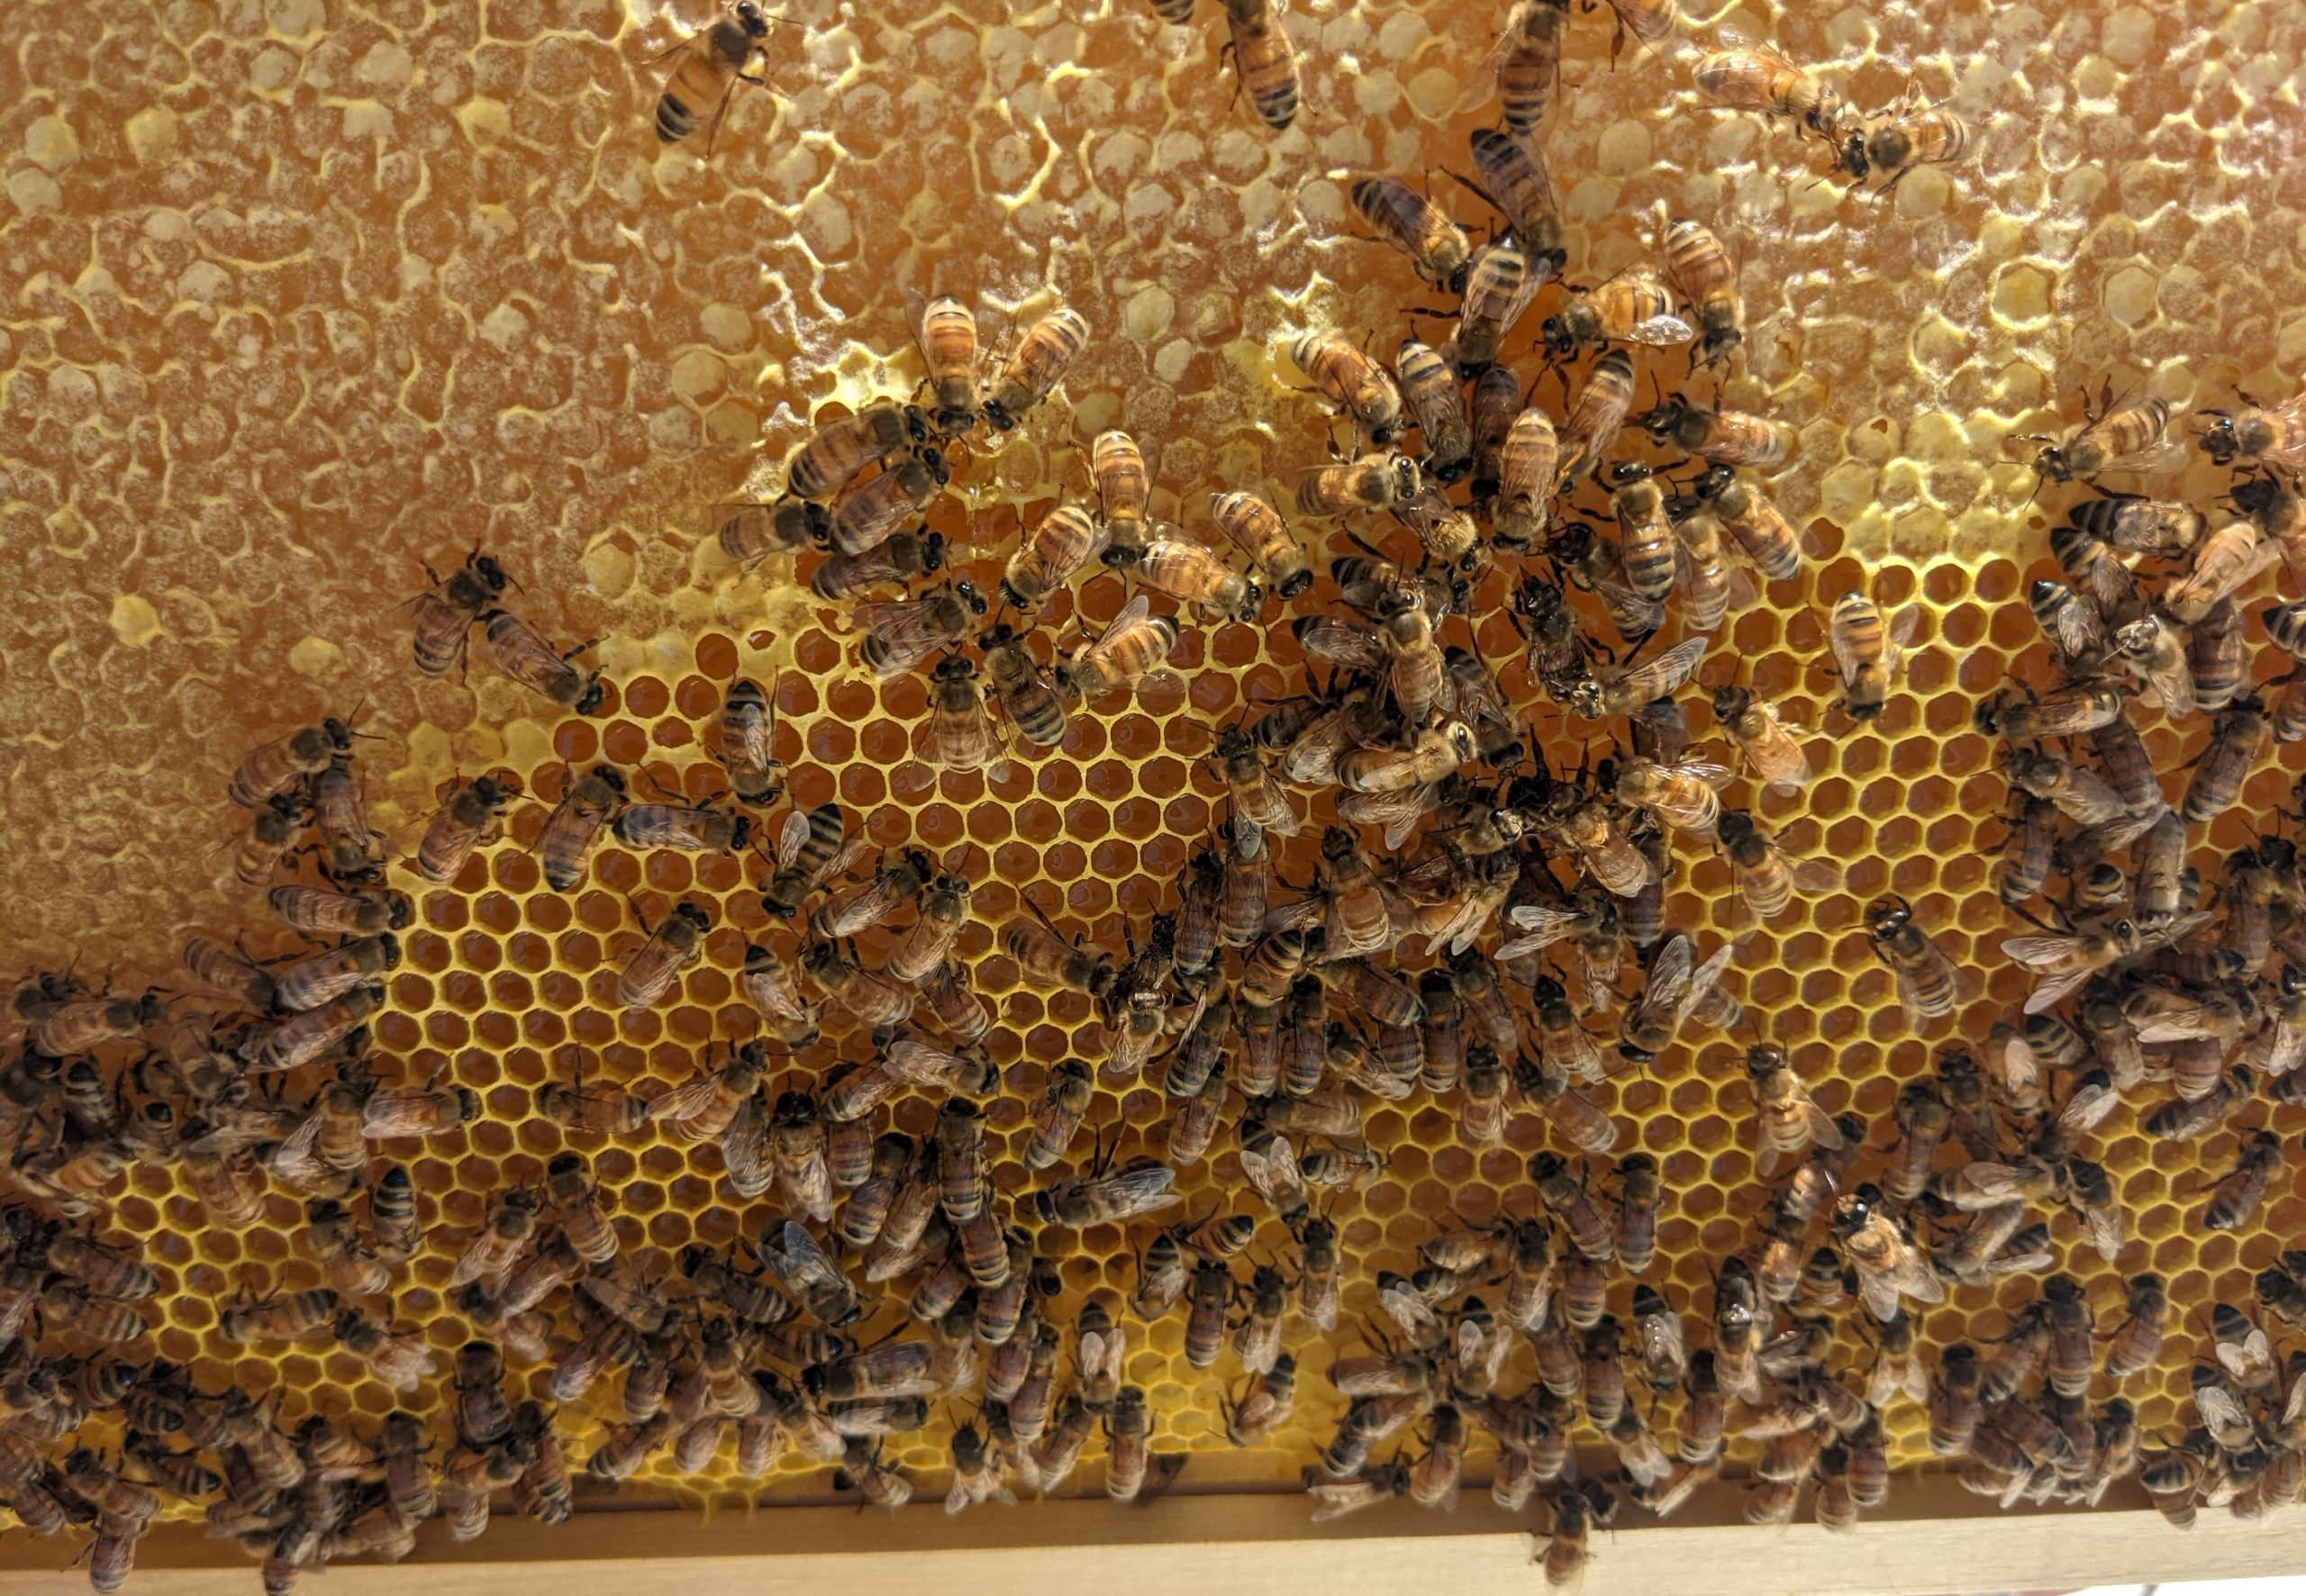 Bees filling the frames